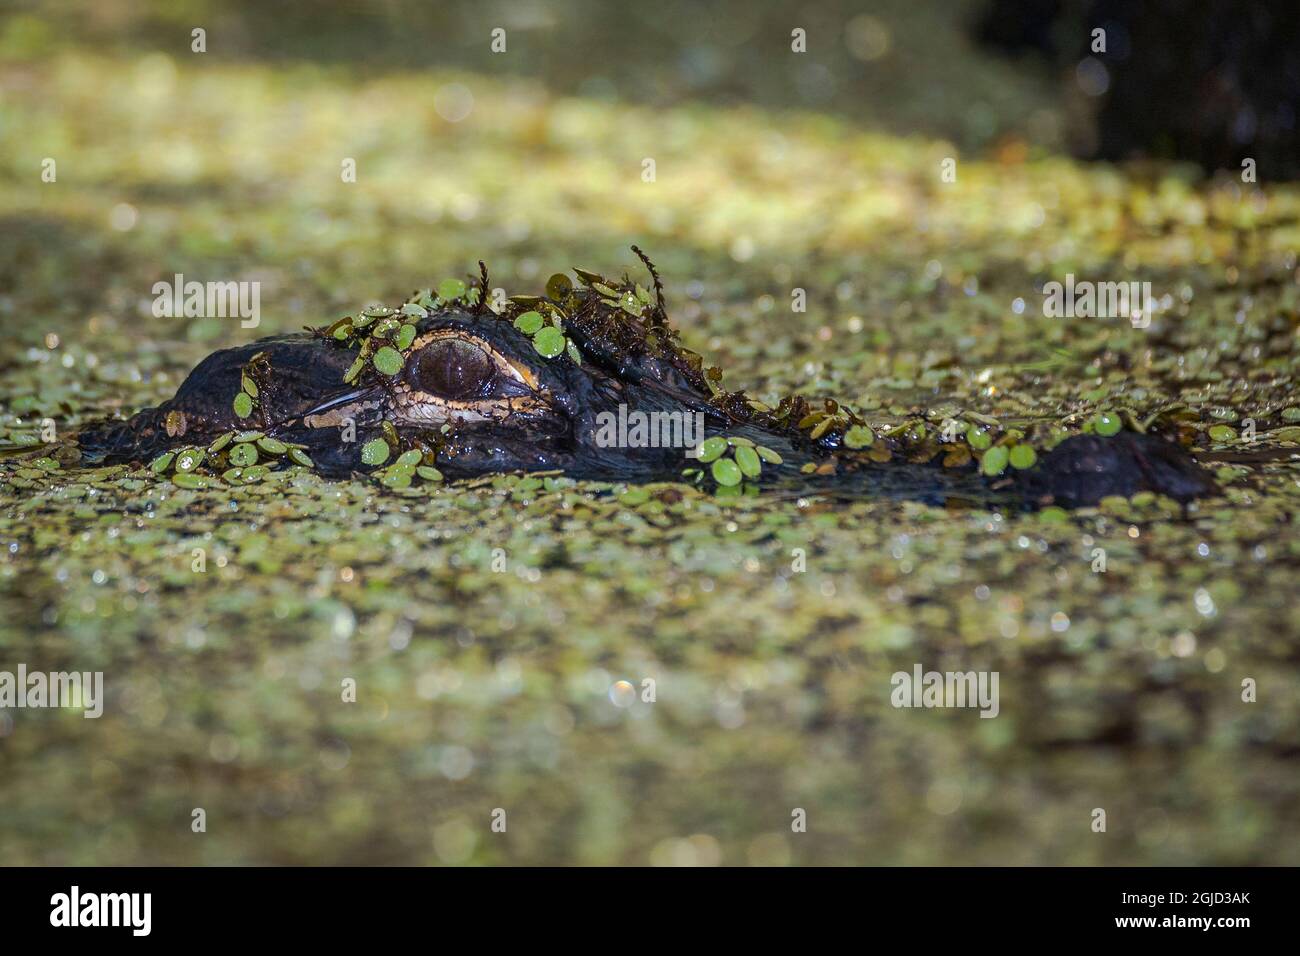 An American alligator peeks above the water and a floating layer of duckweed. Stock Photo